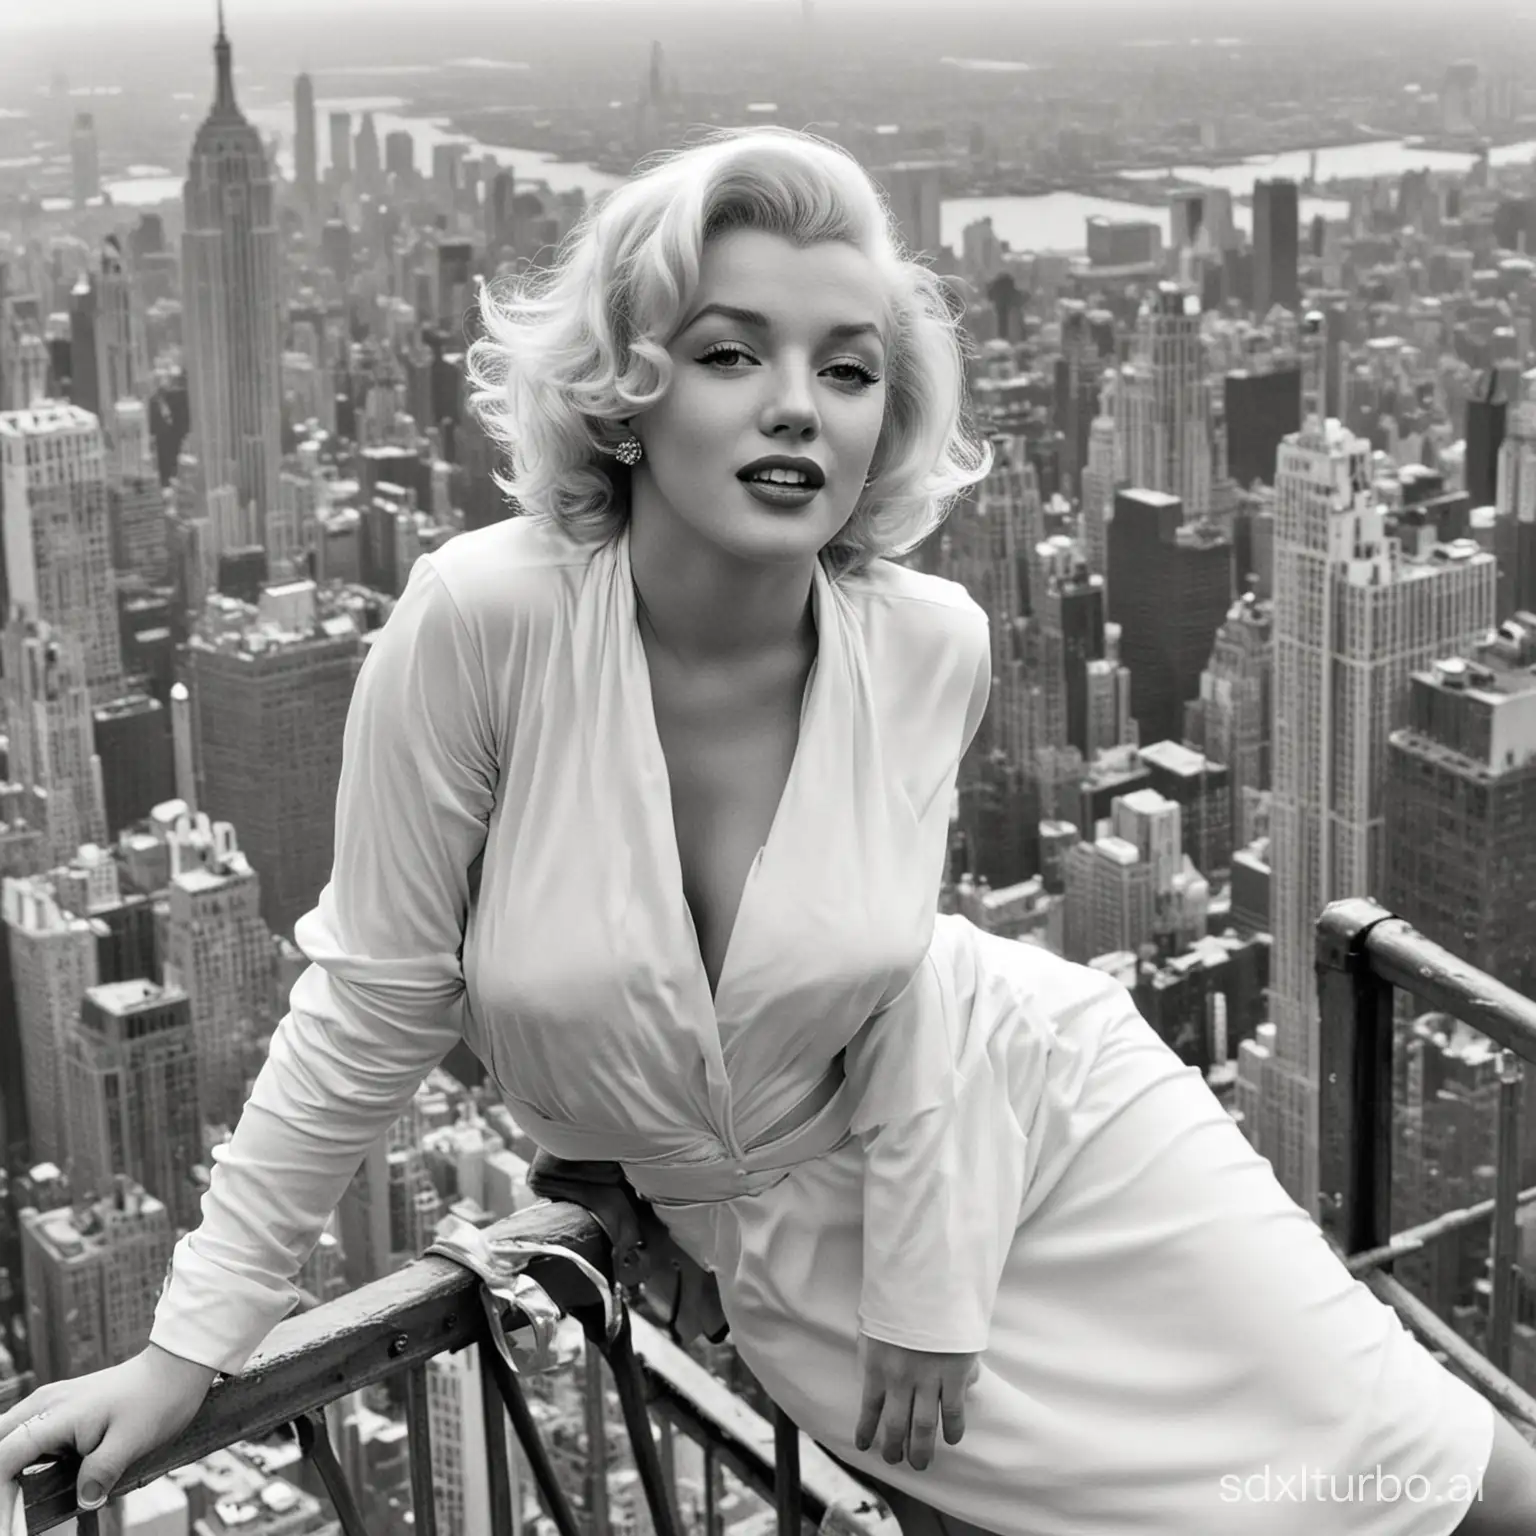 Marilyn Monroe on the top rail of the observation deck of the Empire State Building. She is in the missionary position  